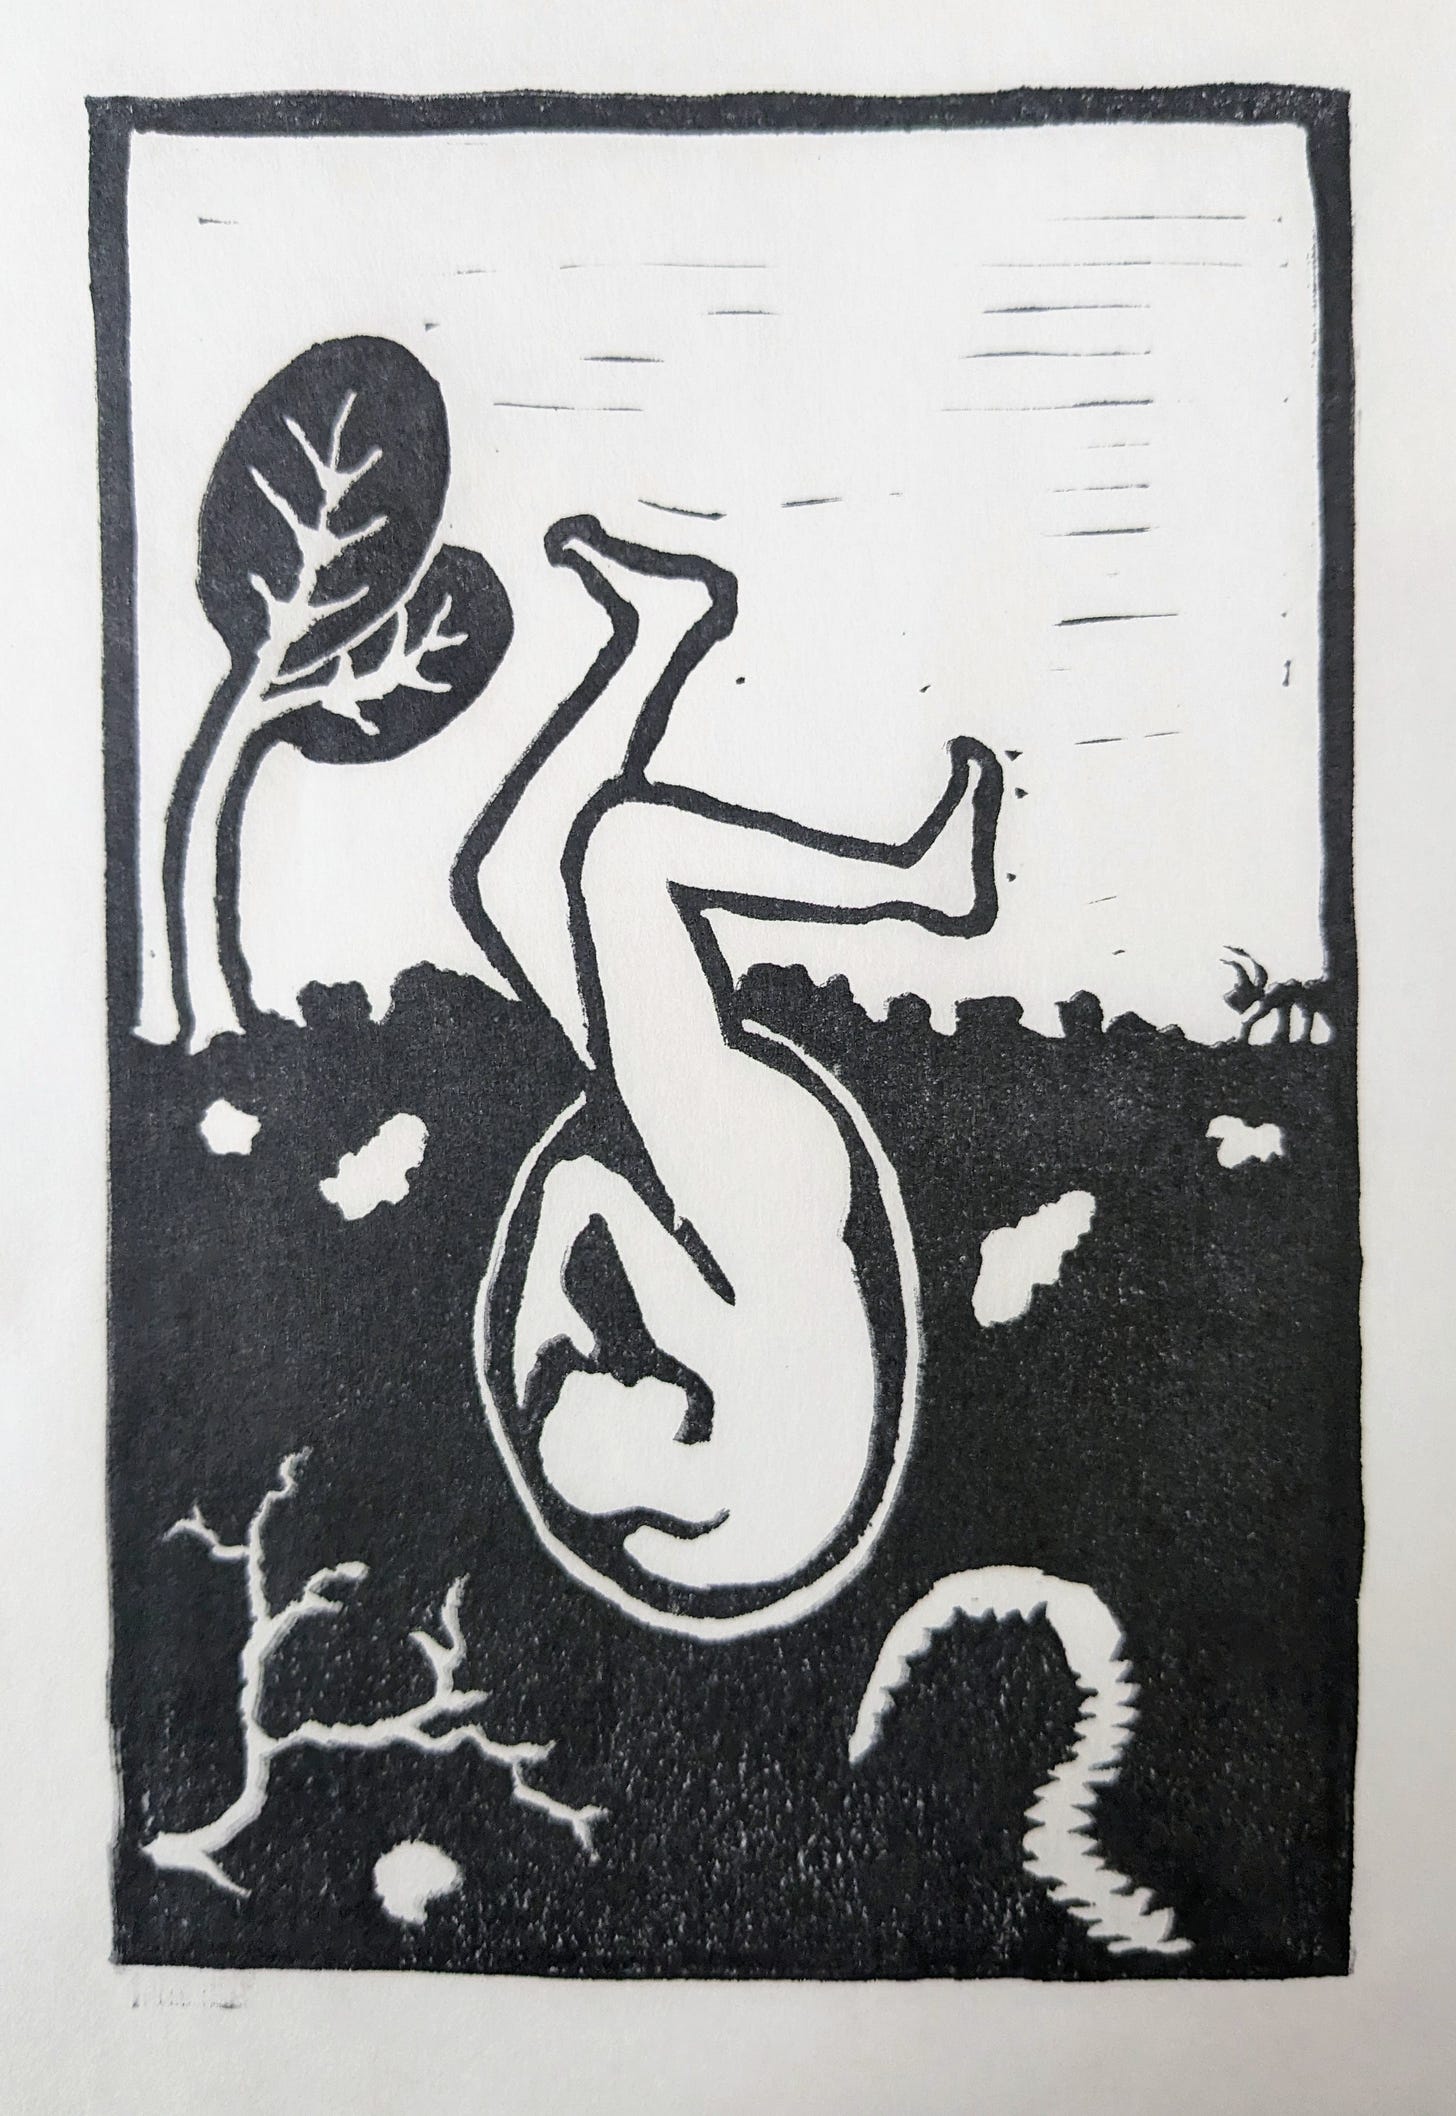 A black-and-white relief print of a person inside a buried seed, with their legs extending above the soil like seed leaves. Around the person are a seedling, an ant, an earthworm, and some roots.